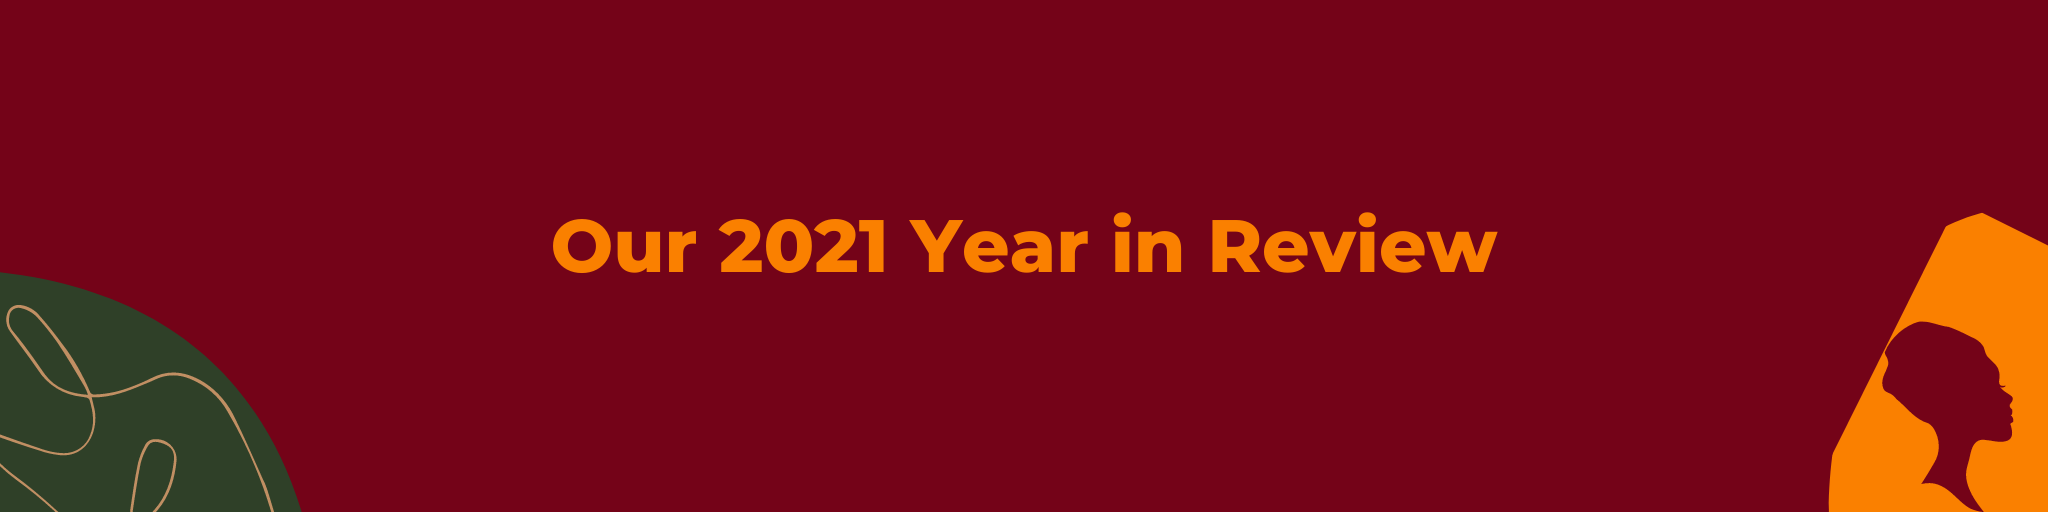 Our 2021 Year in Review 